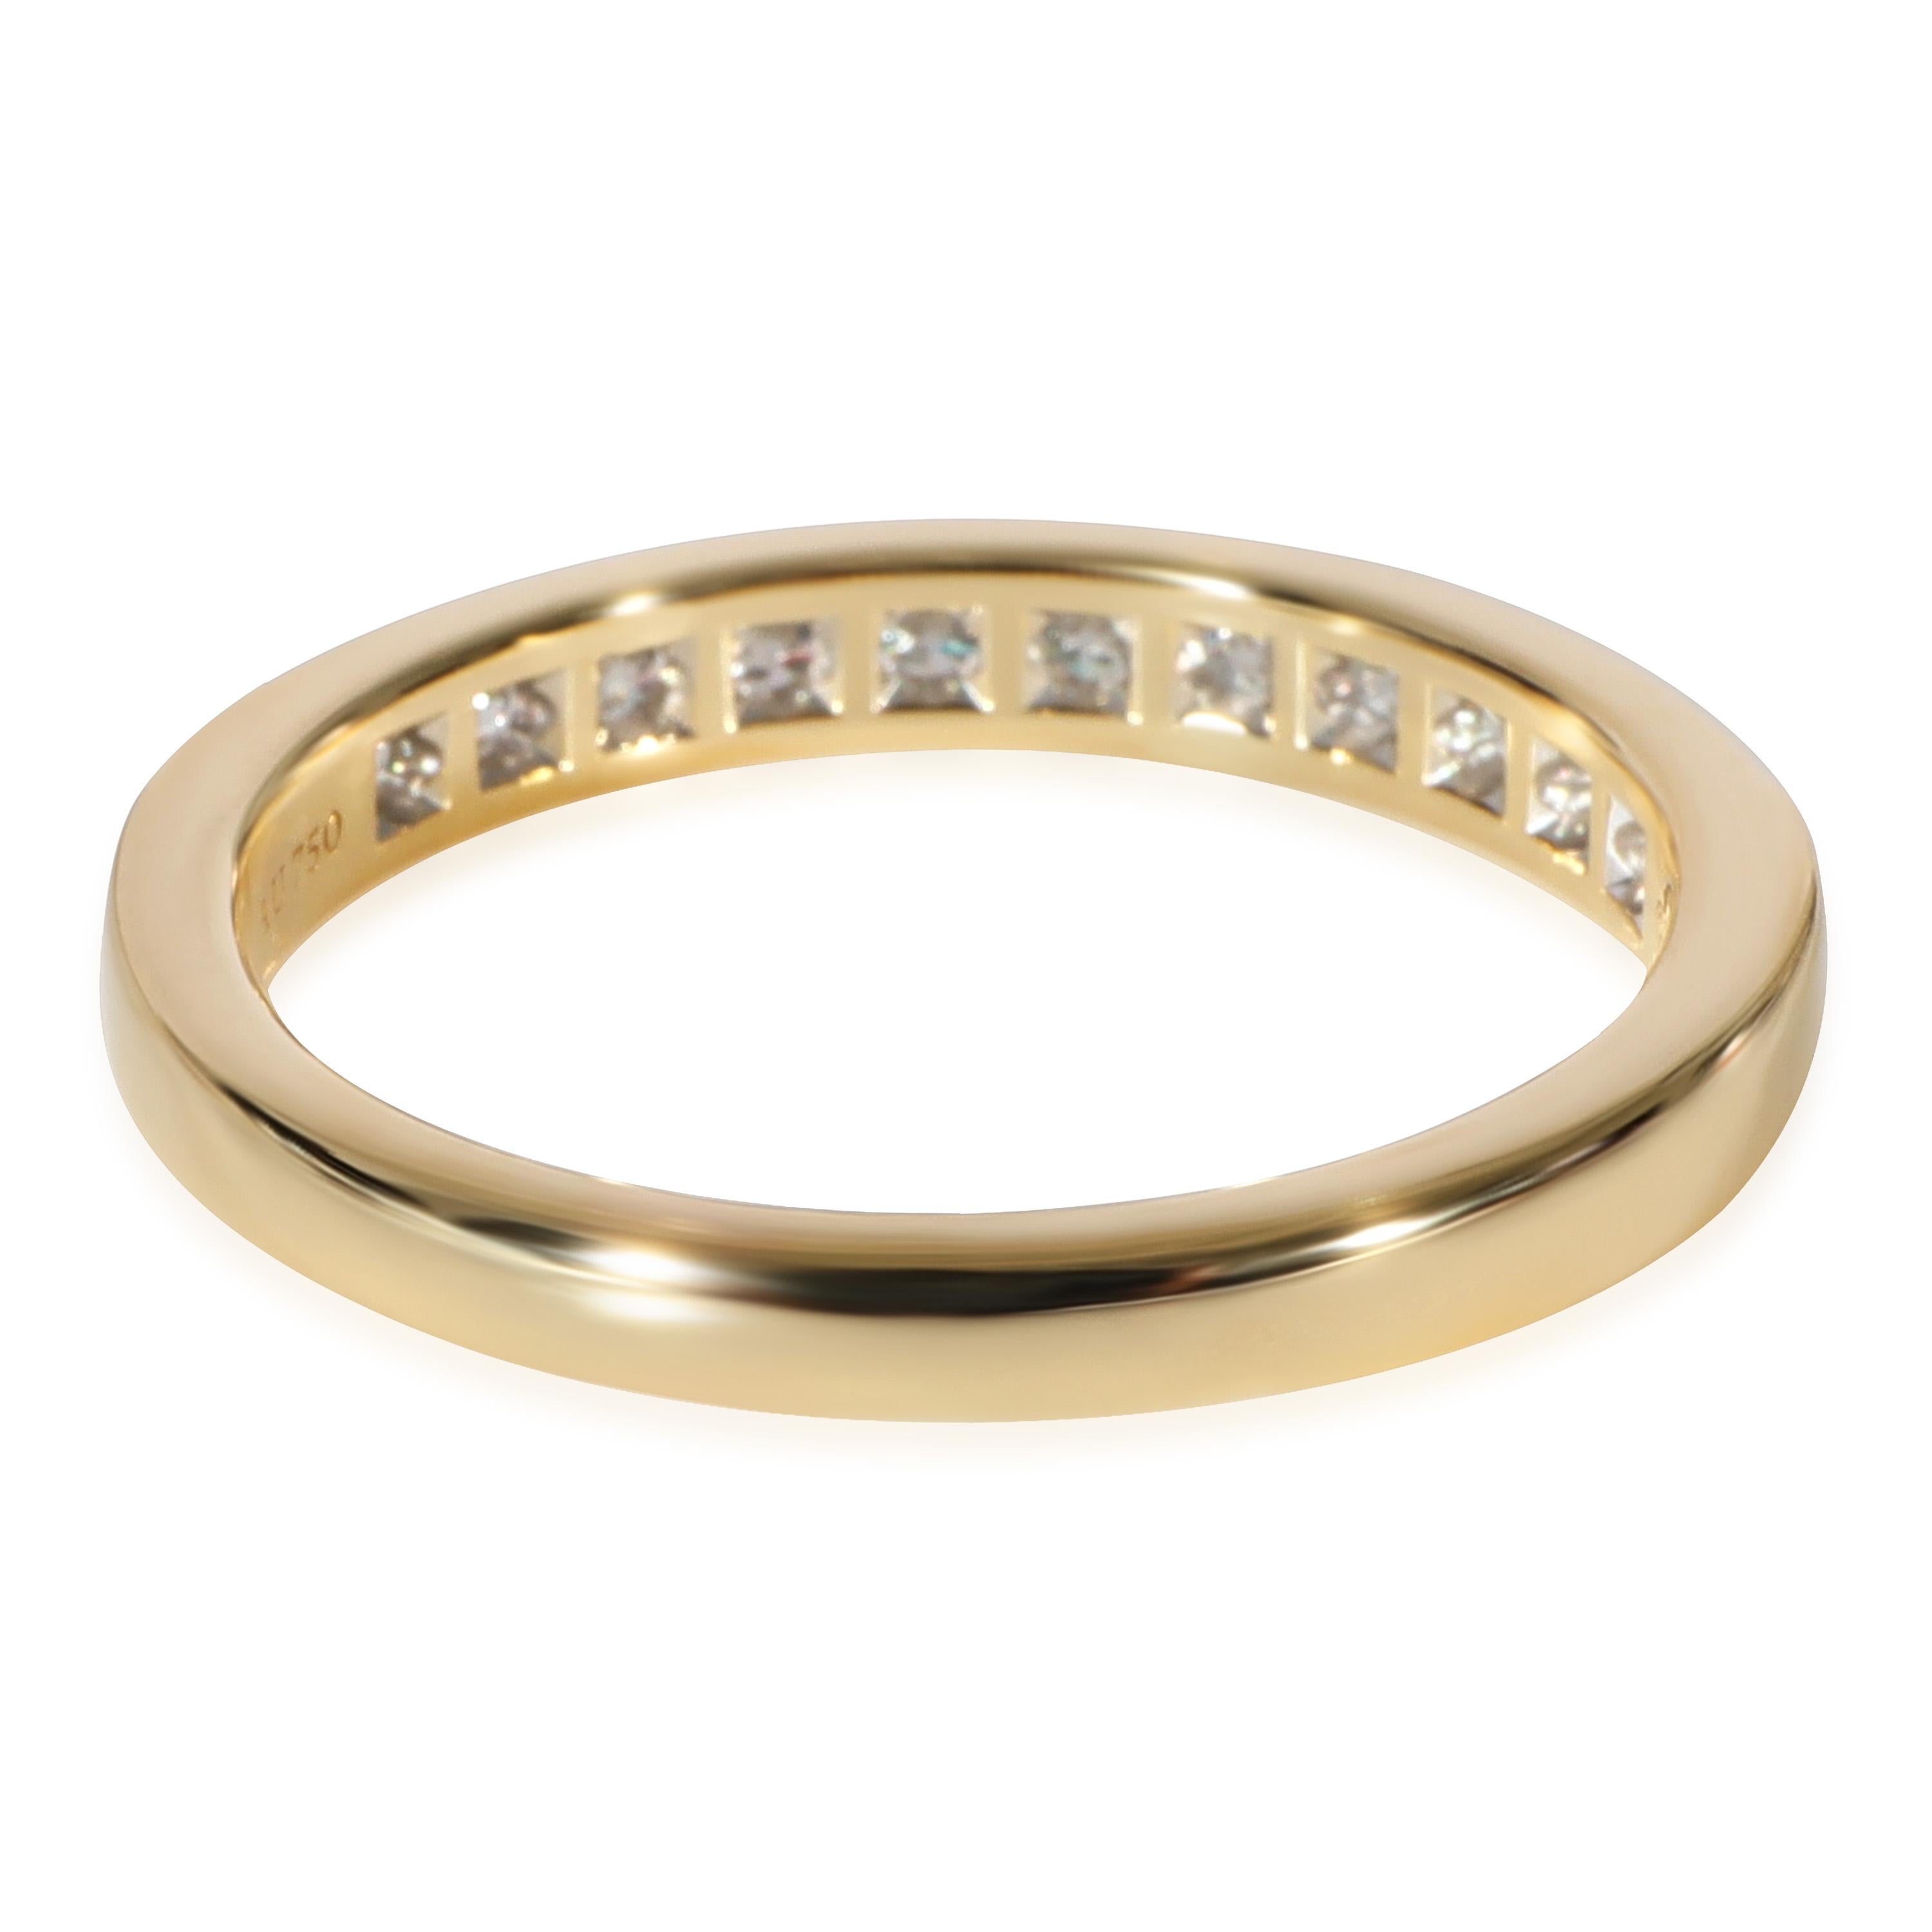 Tiffany & Co. Diamond Wedding Band in 18k Yellow Gold 0.39 Ctw In Excellent Condition For Sale In New York, NY